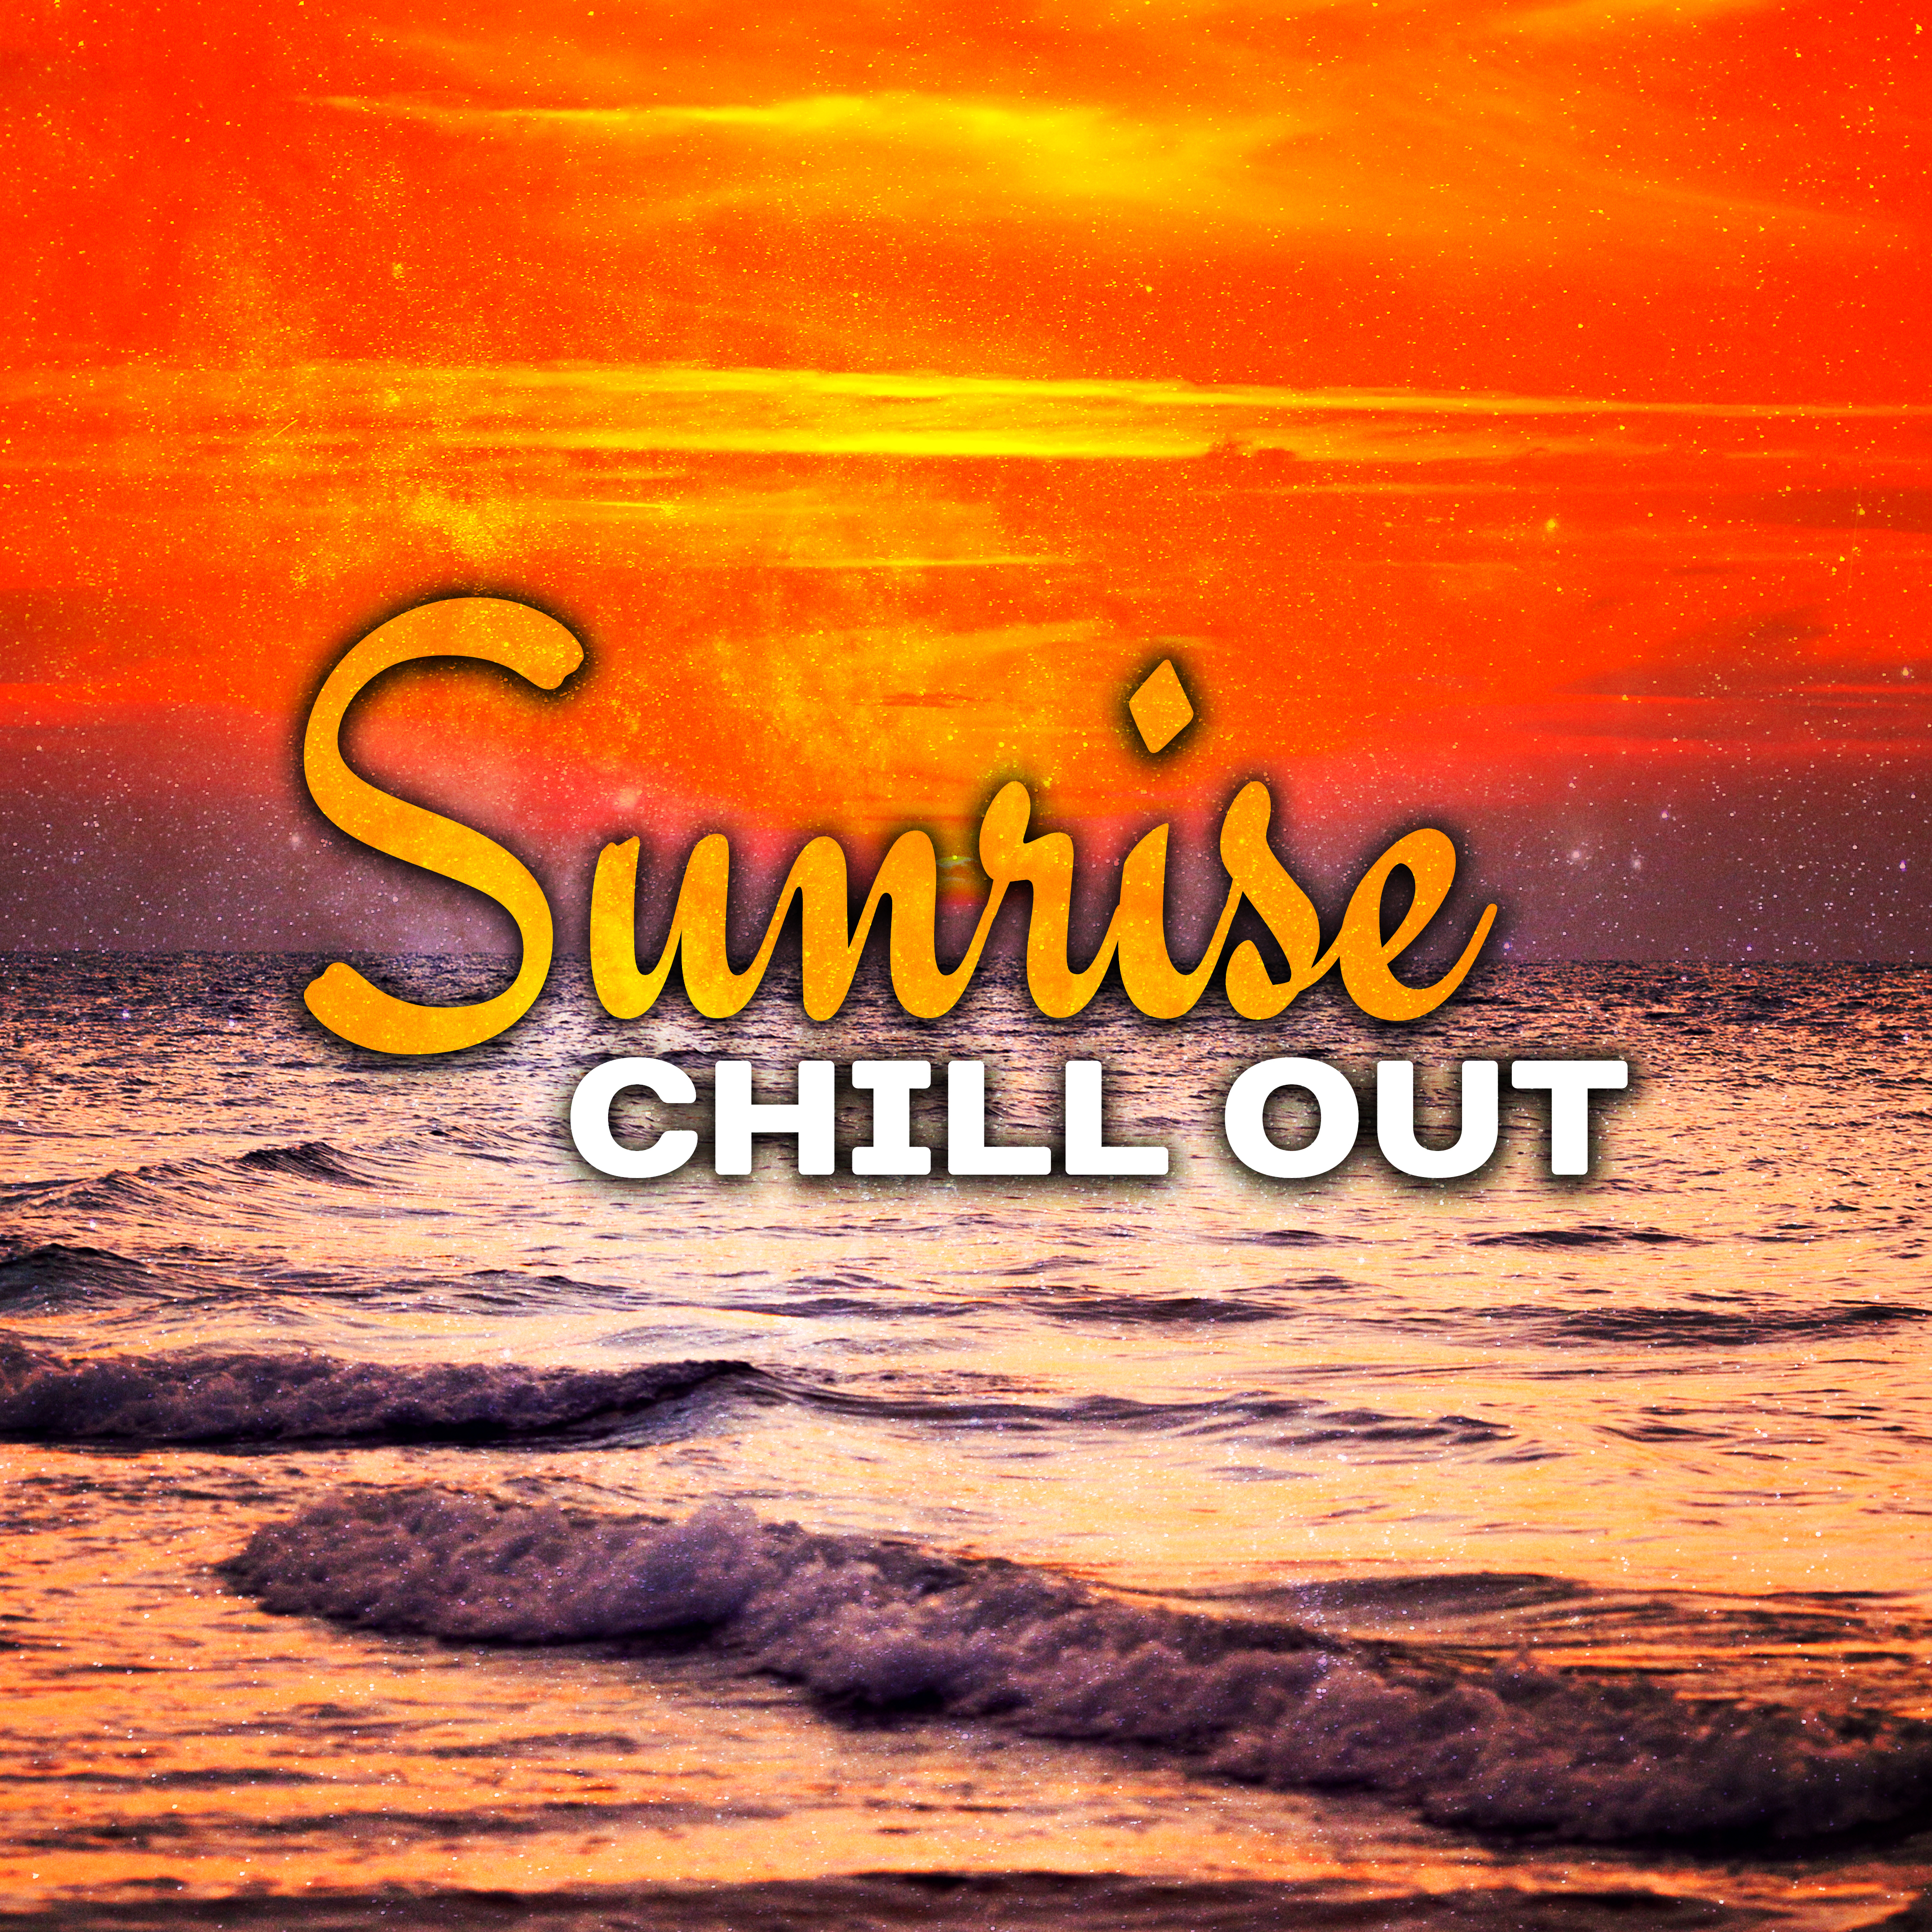 Sunrise Chill Out  Beach Chill, Pure Relaxation, Stress Relief, Summertime, Ambient Music, Sunrise Feeling, Rest on the Beach